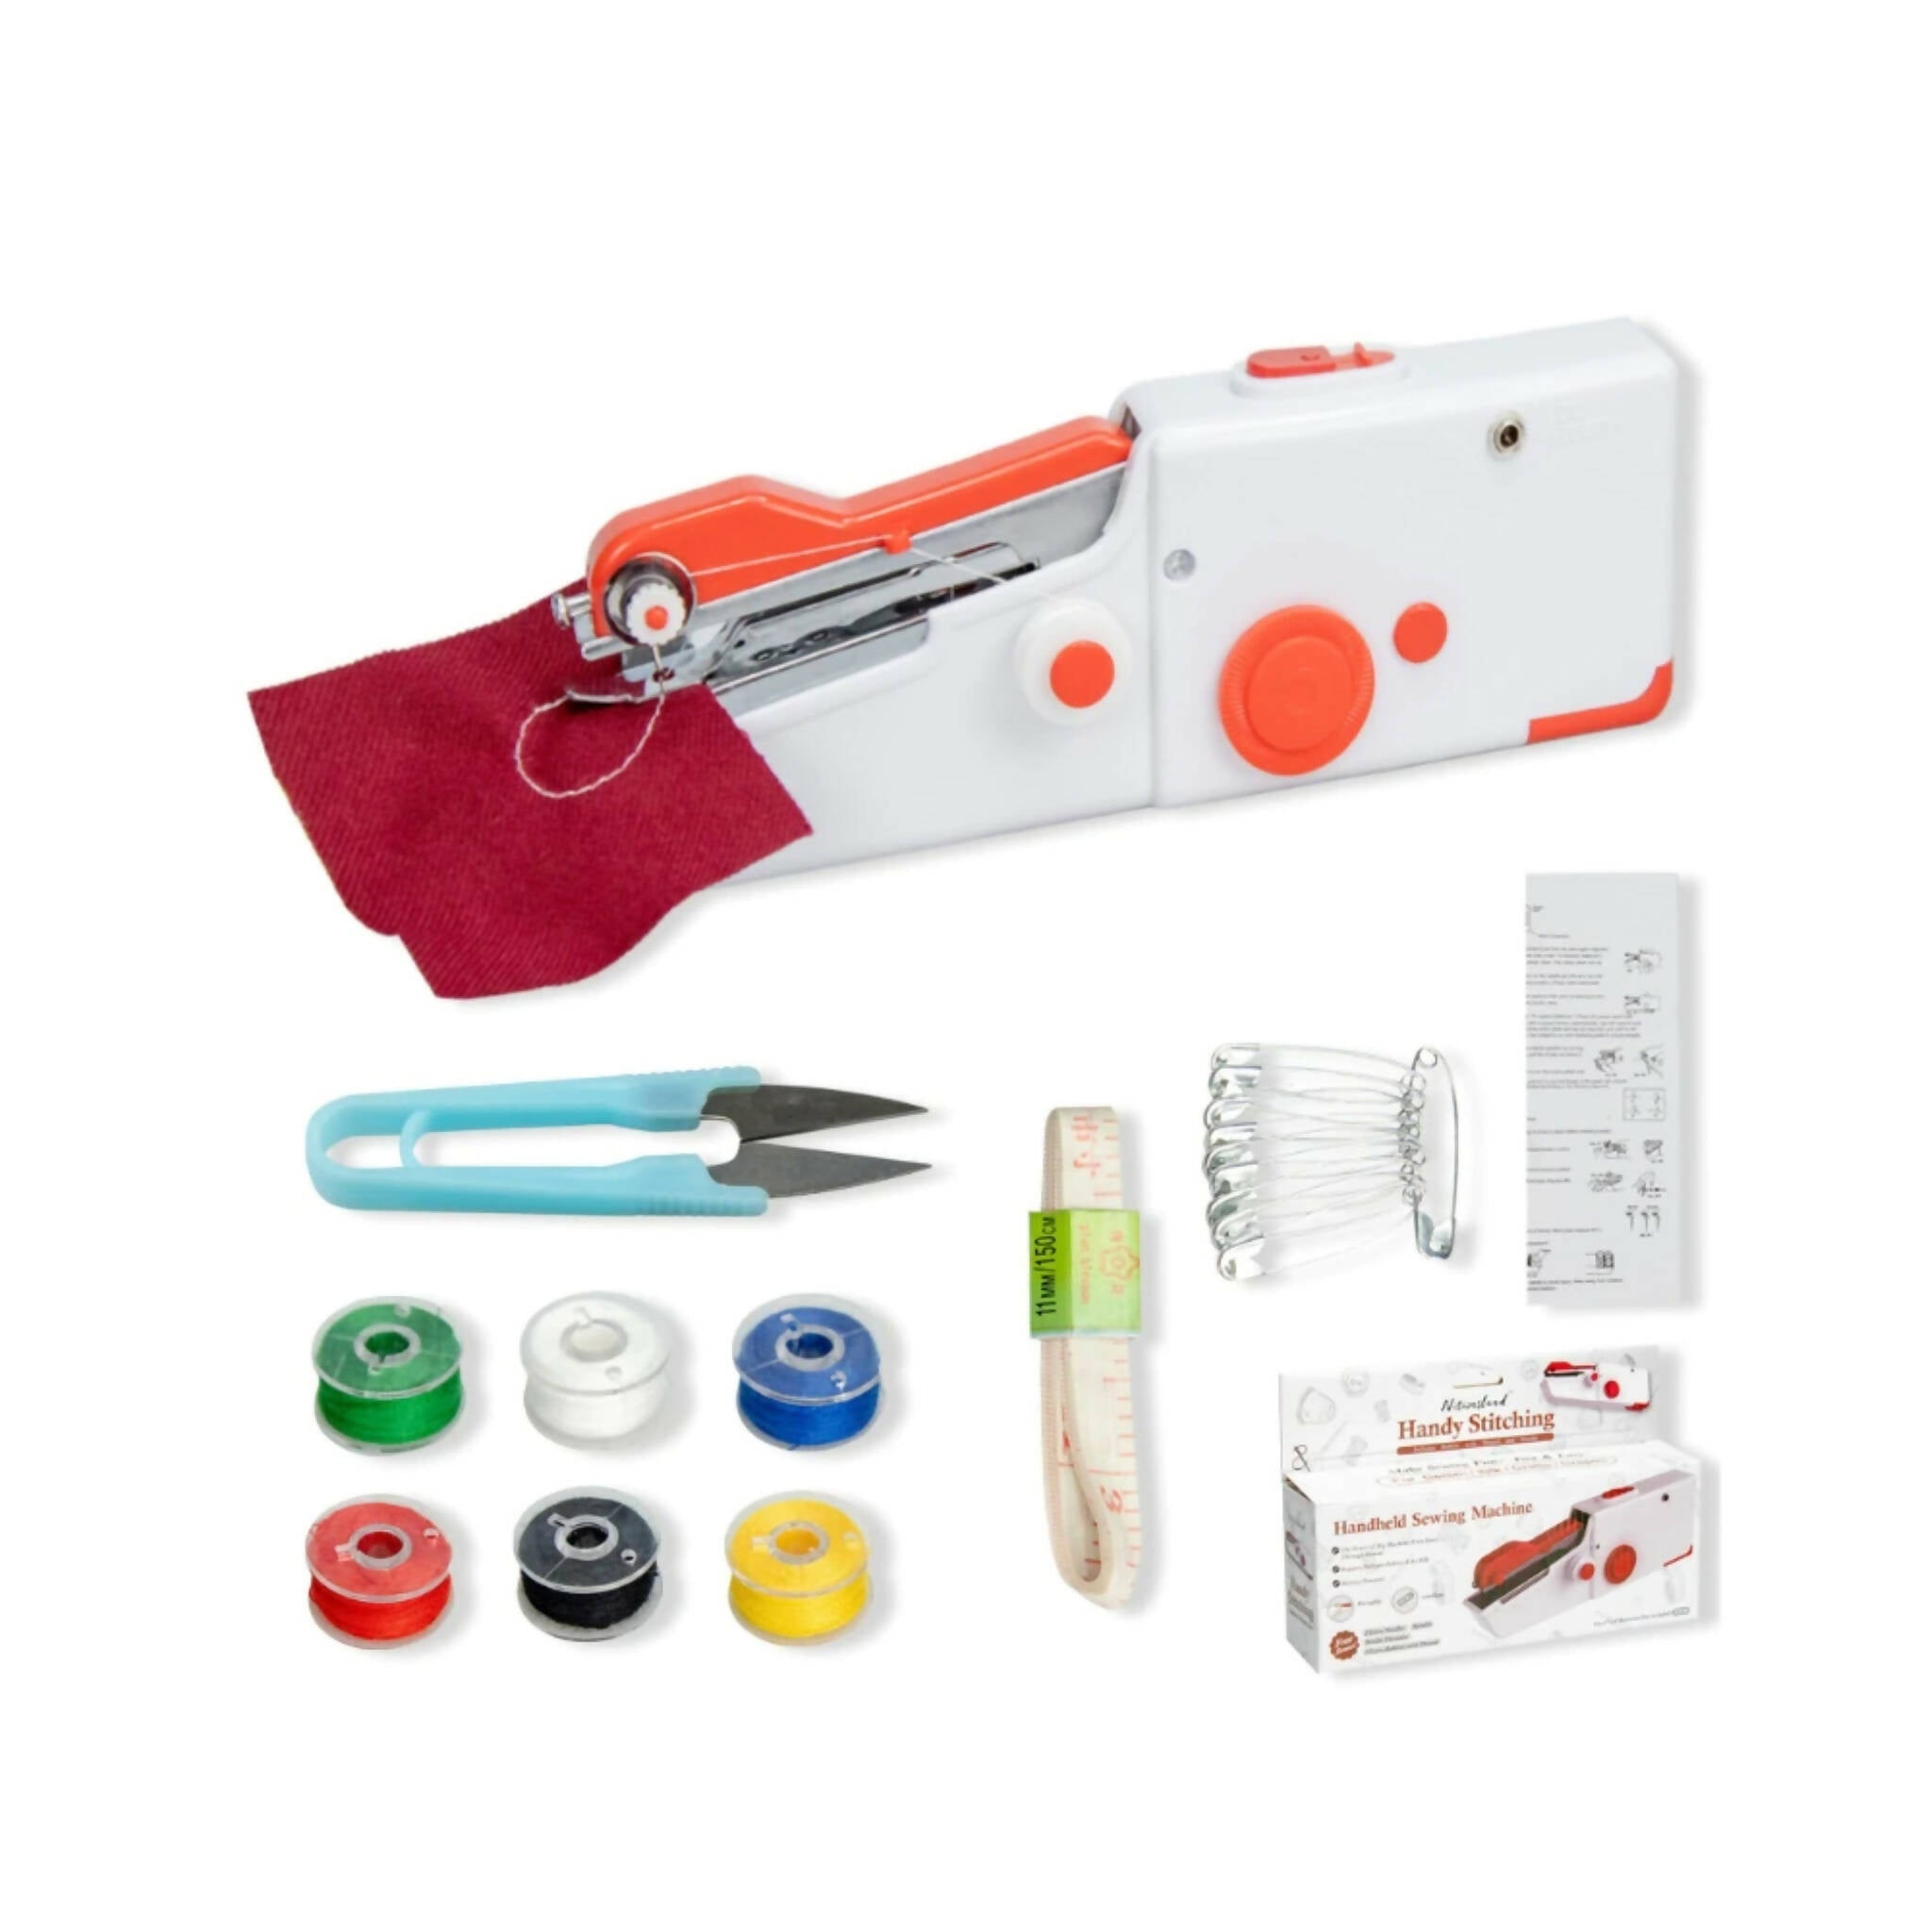 Swing Silai Machine, Quick, Portable, & Handy Stitching Solution!